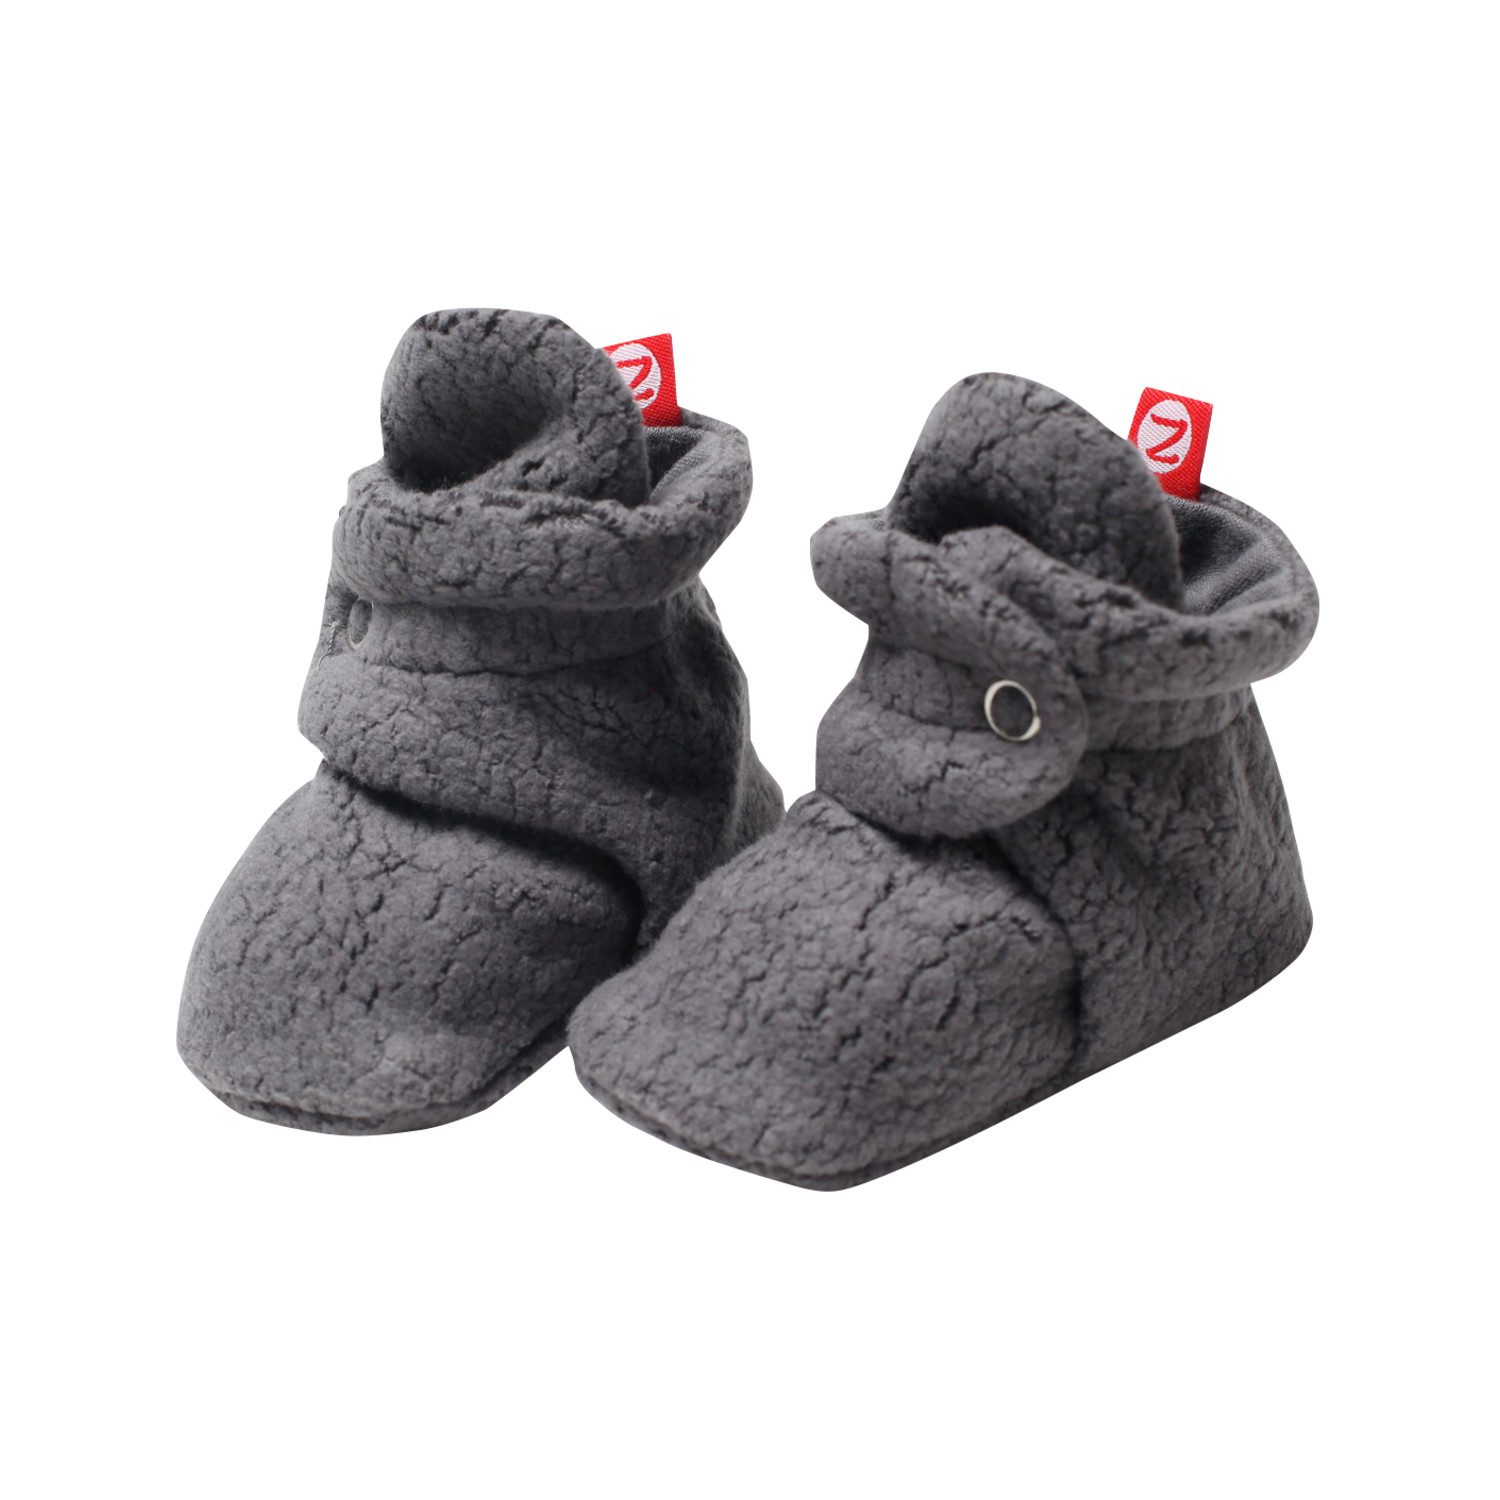 best baby slippers